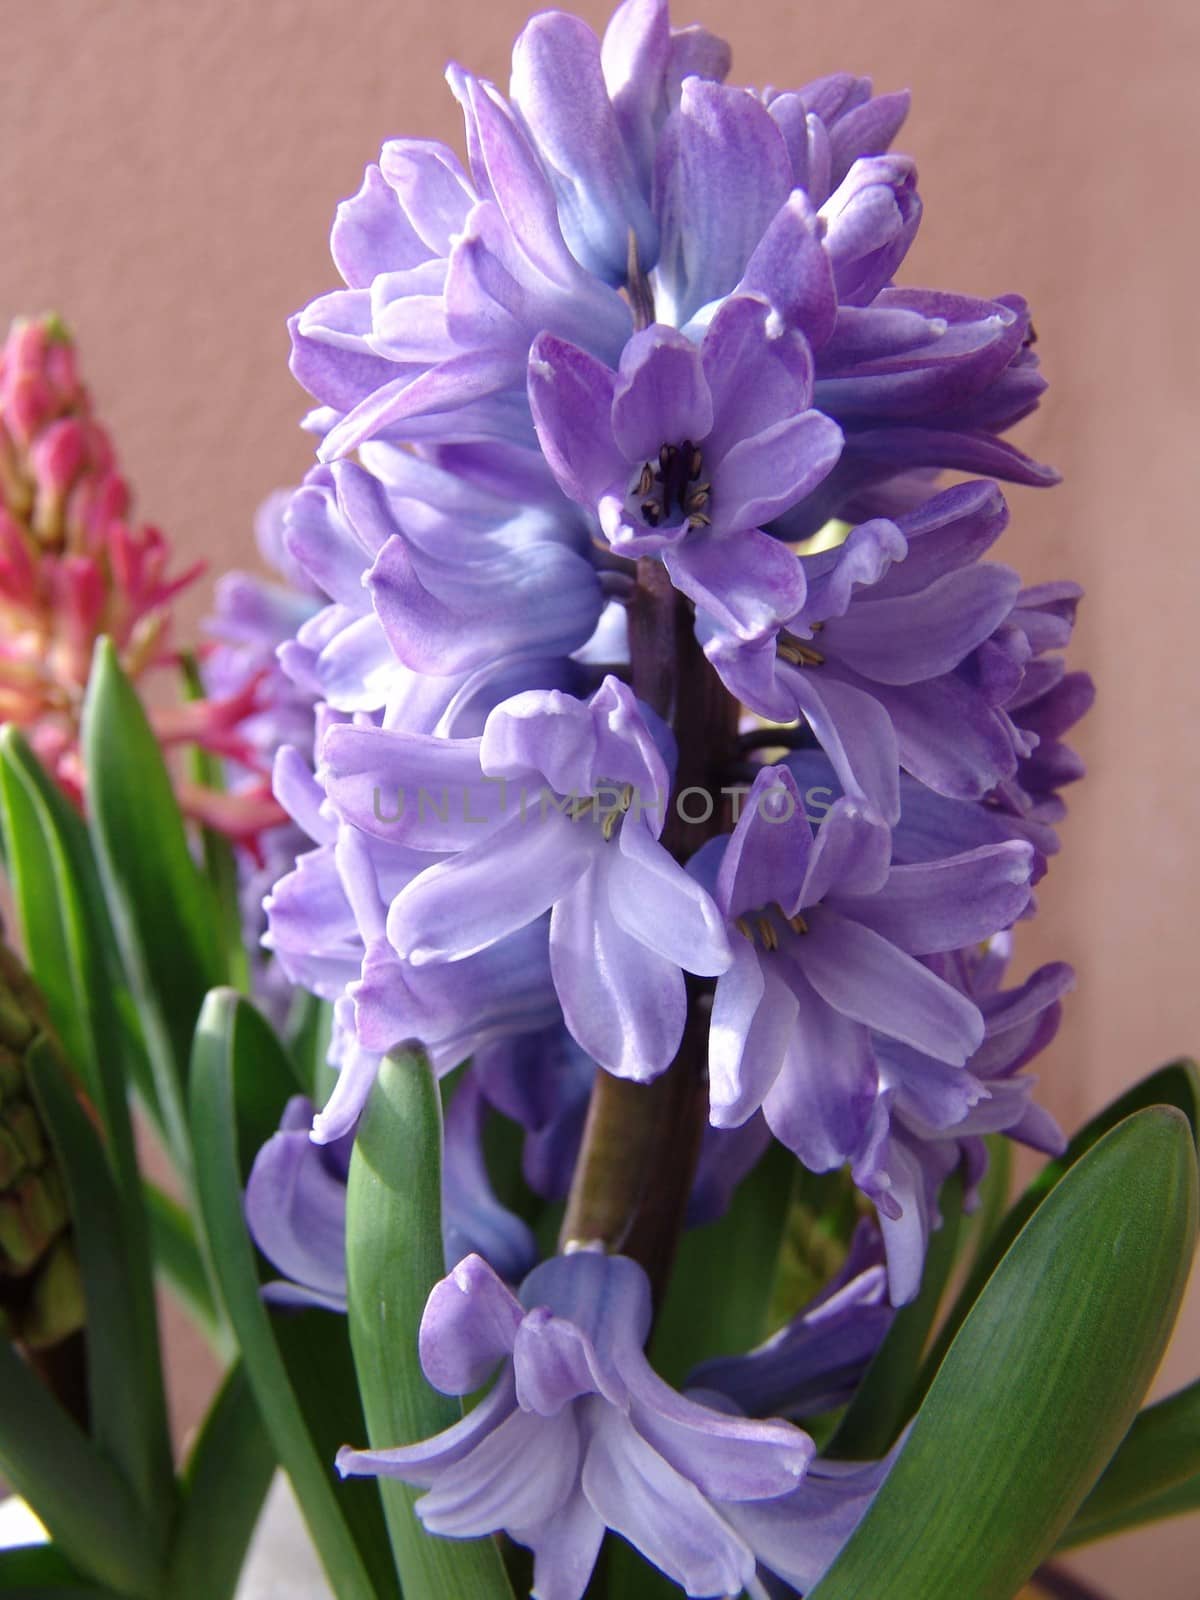 Flower hyacinth Hyacinth. Hyacinths bloom in early spring are bright and very fragrant flowers. by elena_vz